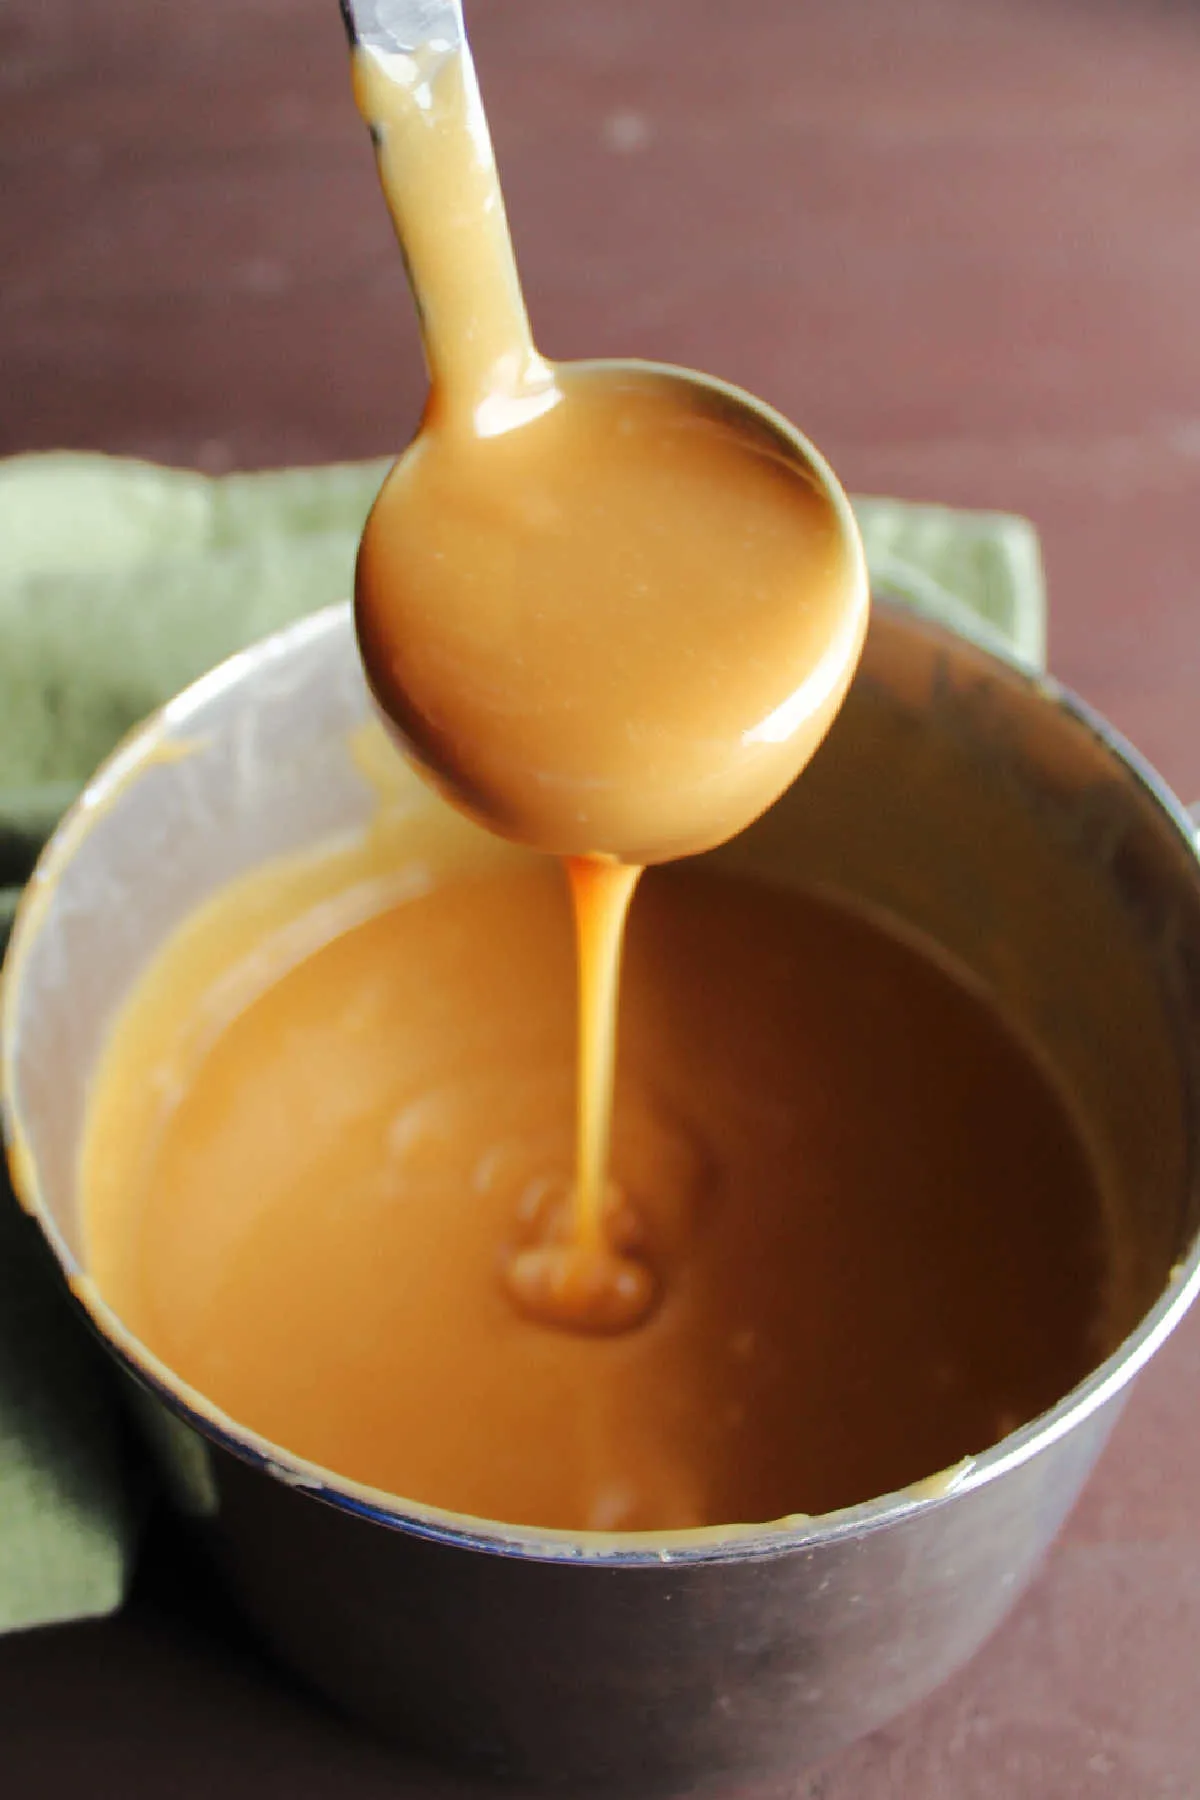 Ladle filled with thick rich caramel sauce with some dripping over the edge into the saucepan.